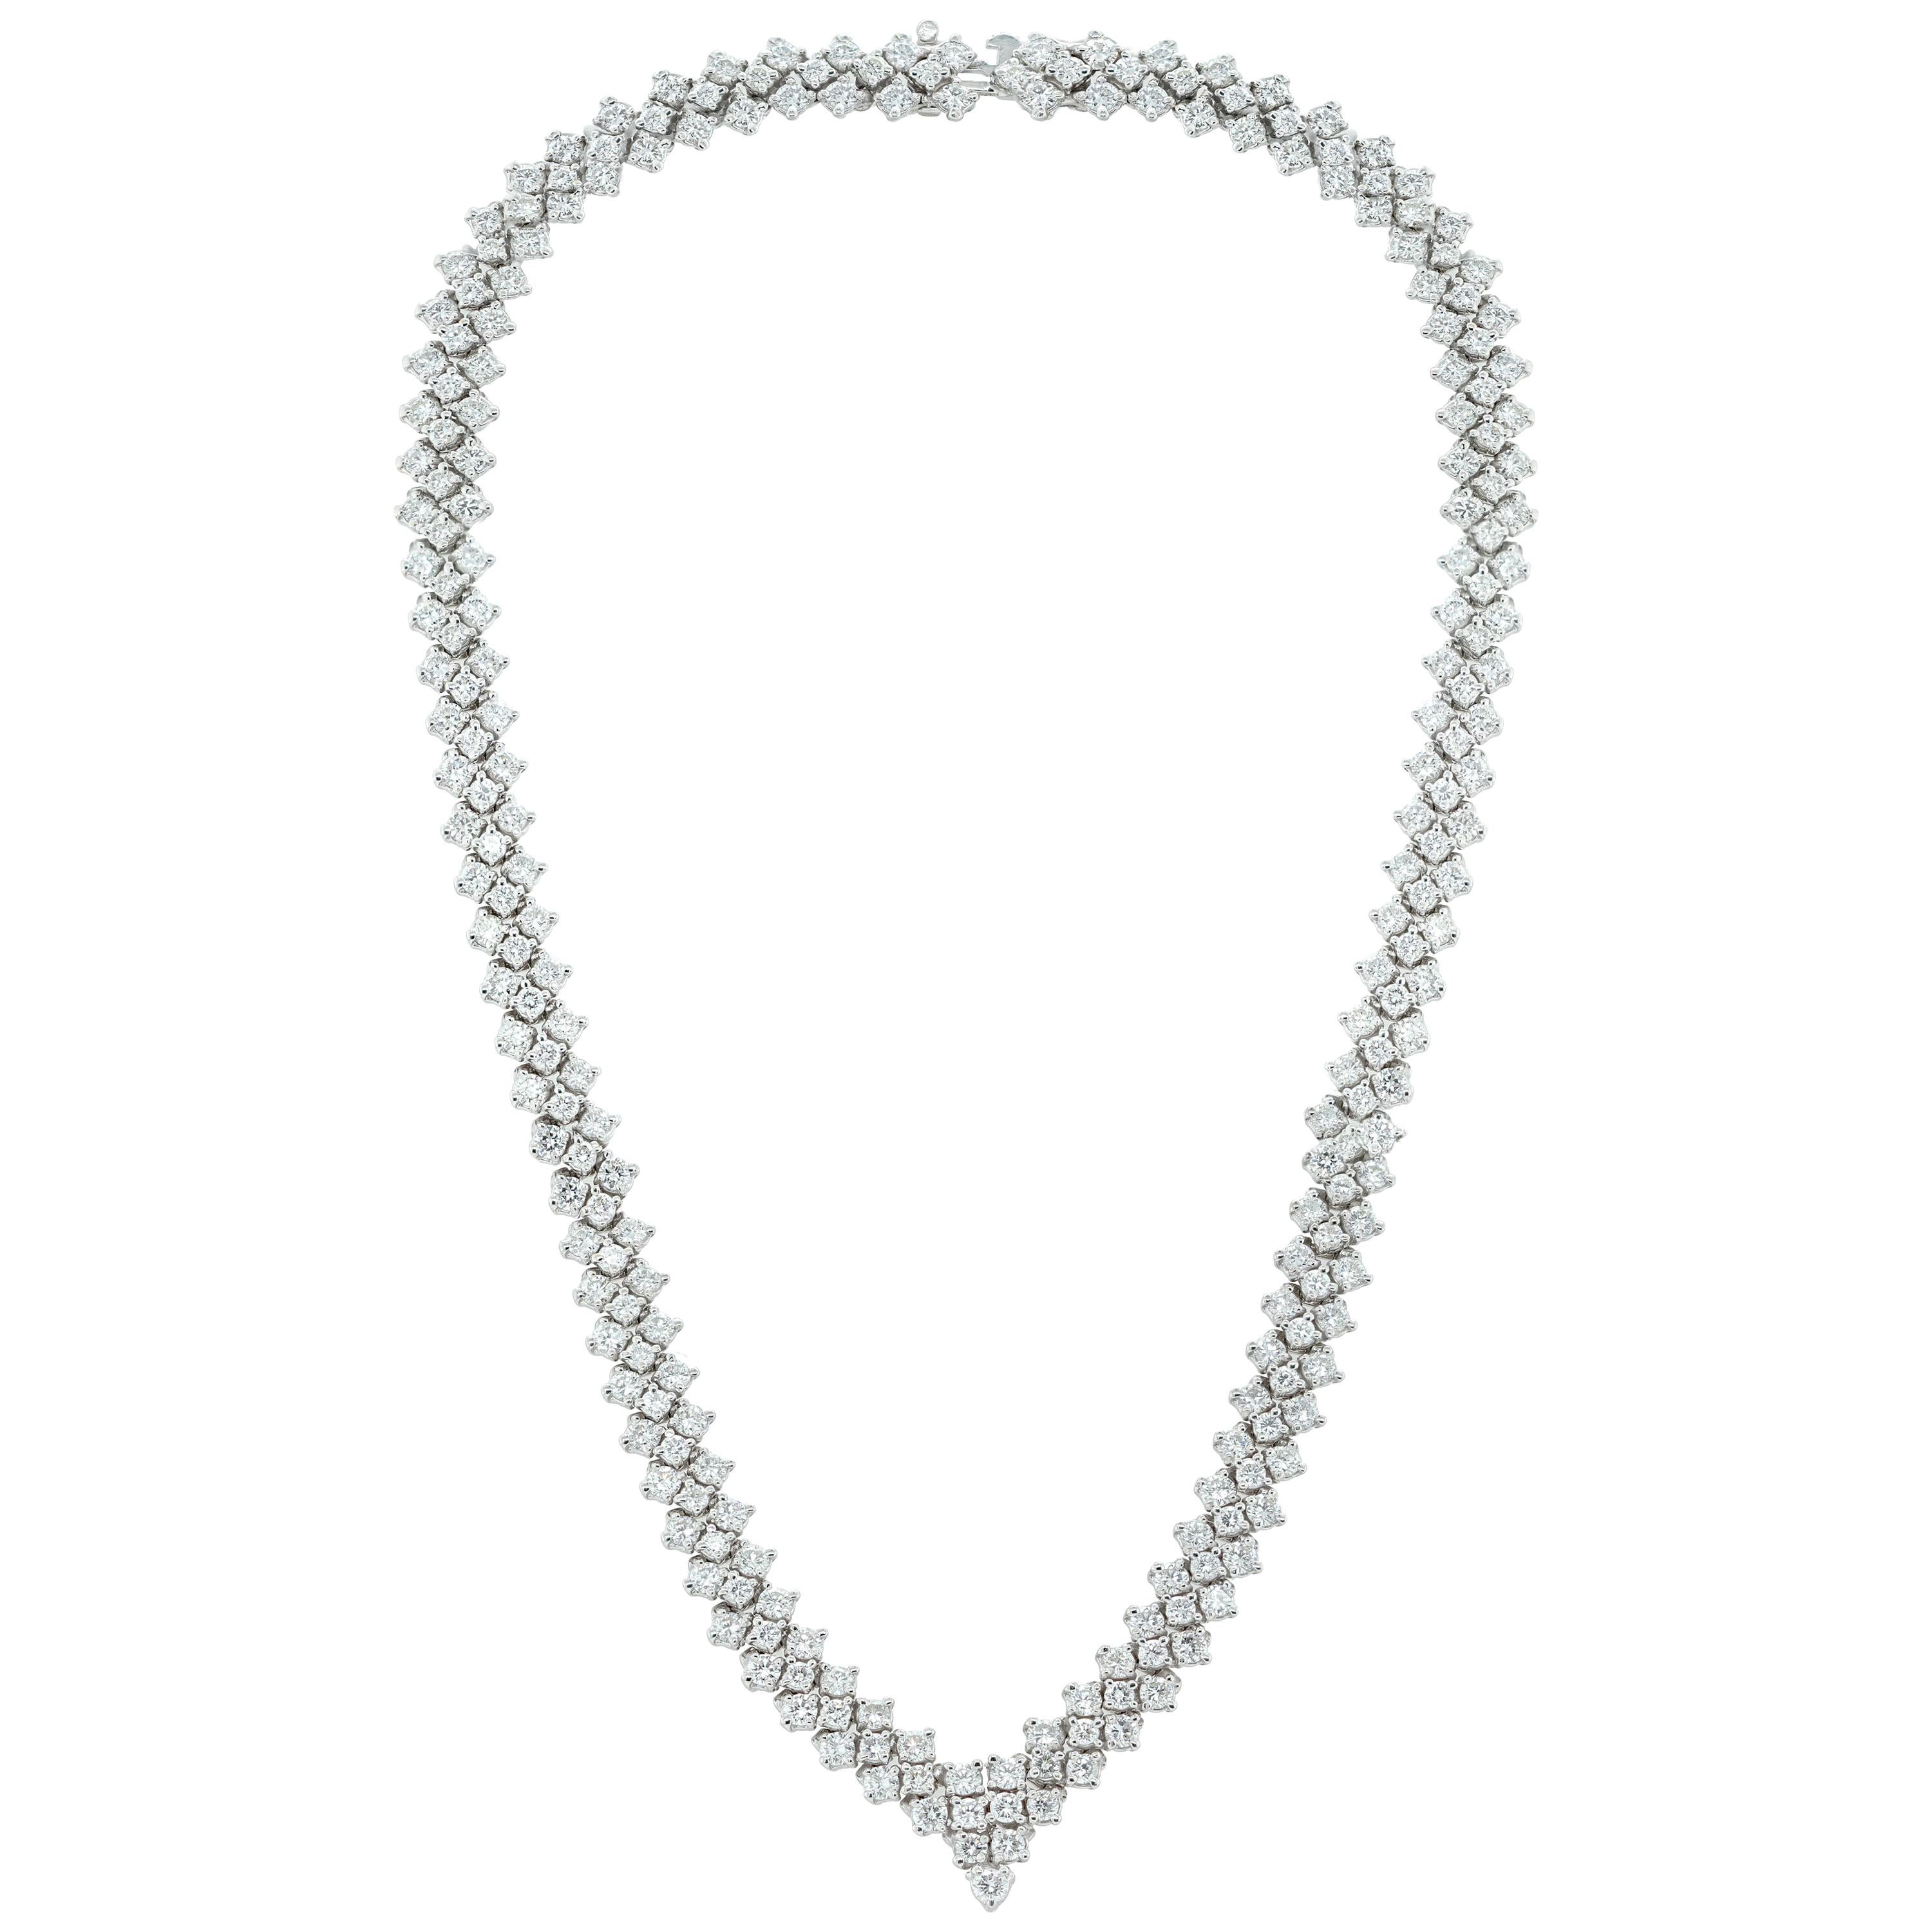 18KT white gold cluster style diamond necklace, features 22.00 cts of round diamonds, tapering off with a V-style at the end.

This product comes with a certificate of appraisal
This product will be packaged in a custom box

Composition:
18K white